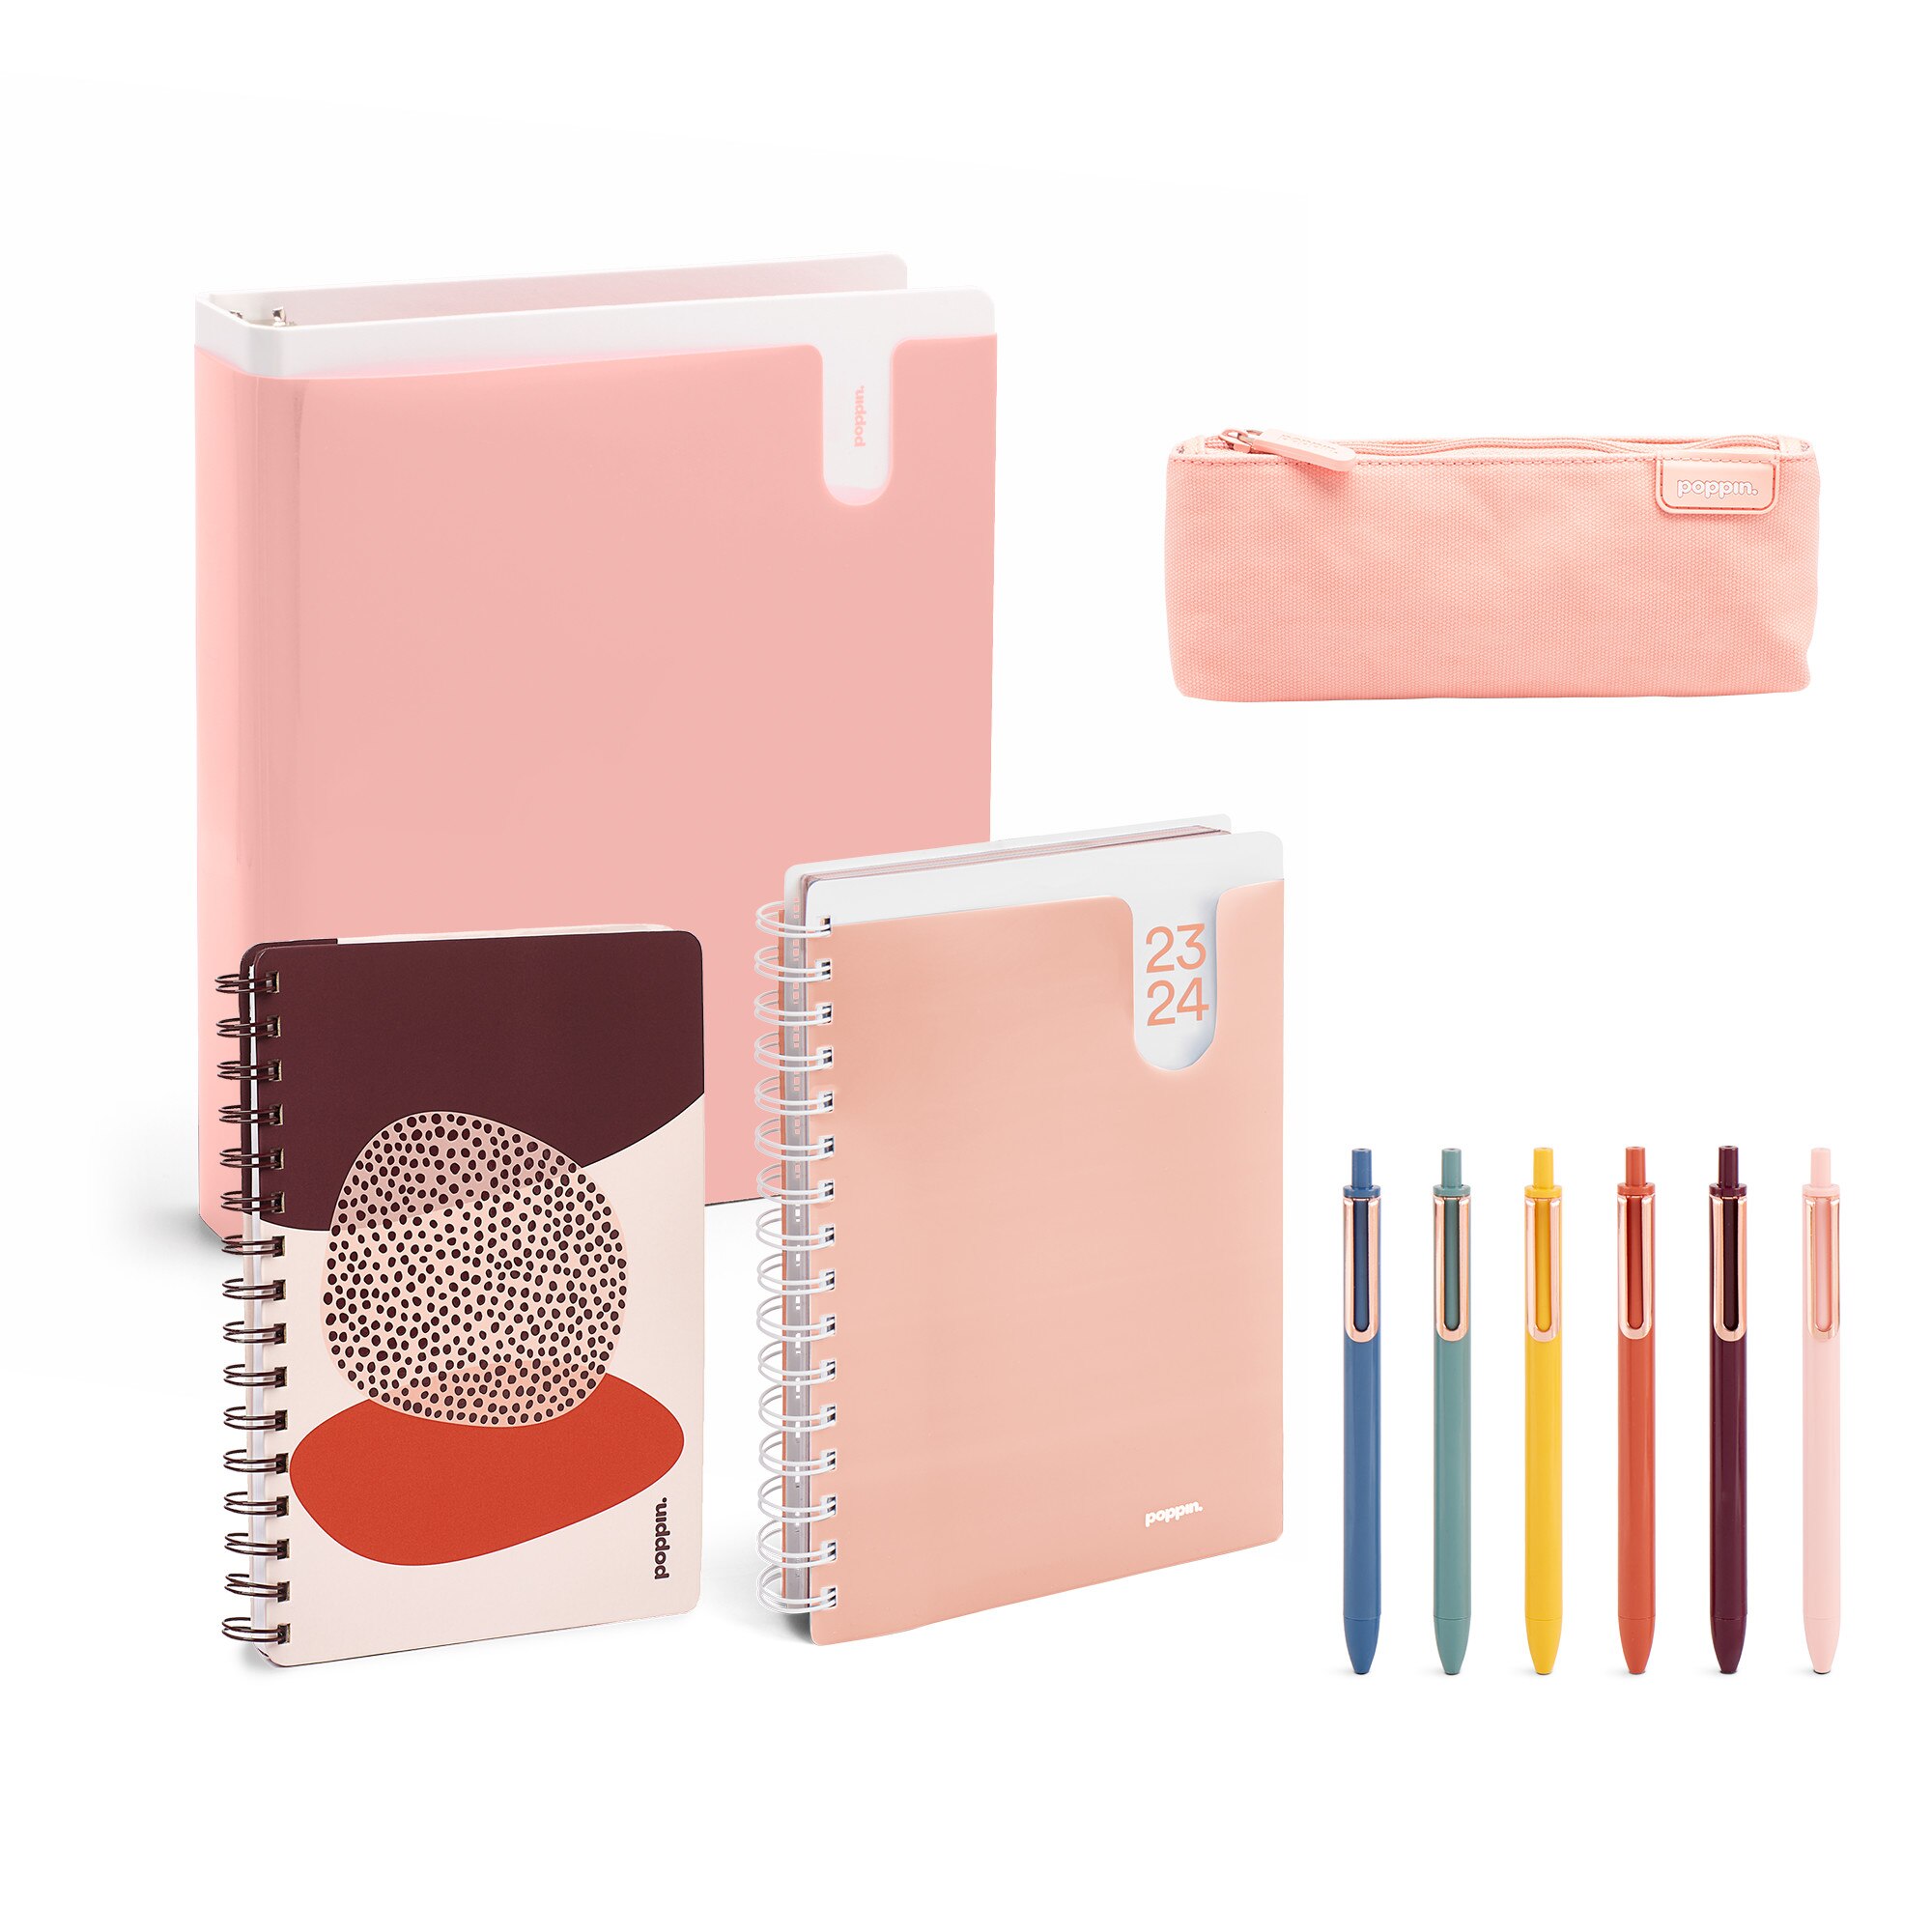 The Essentials Back to School Kit - Blush